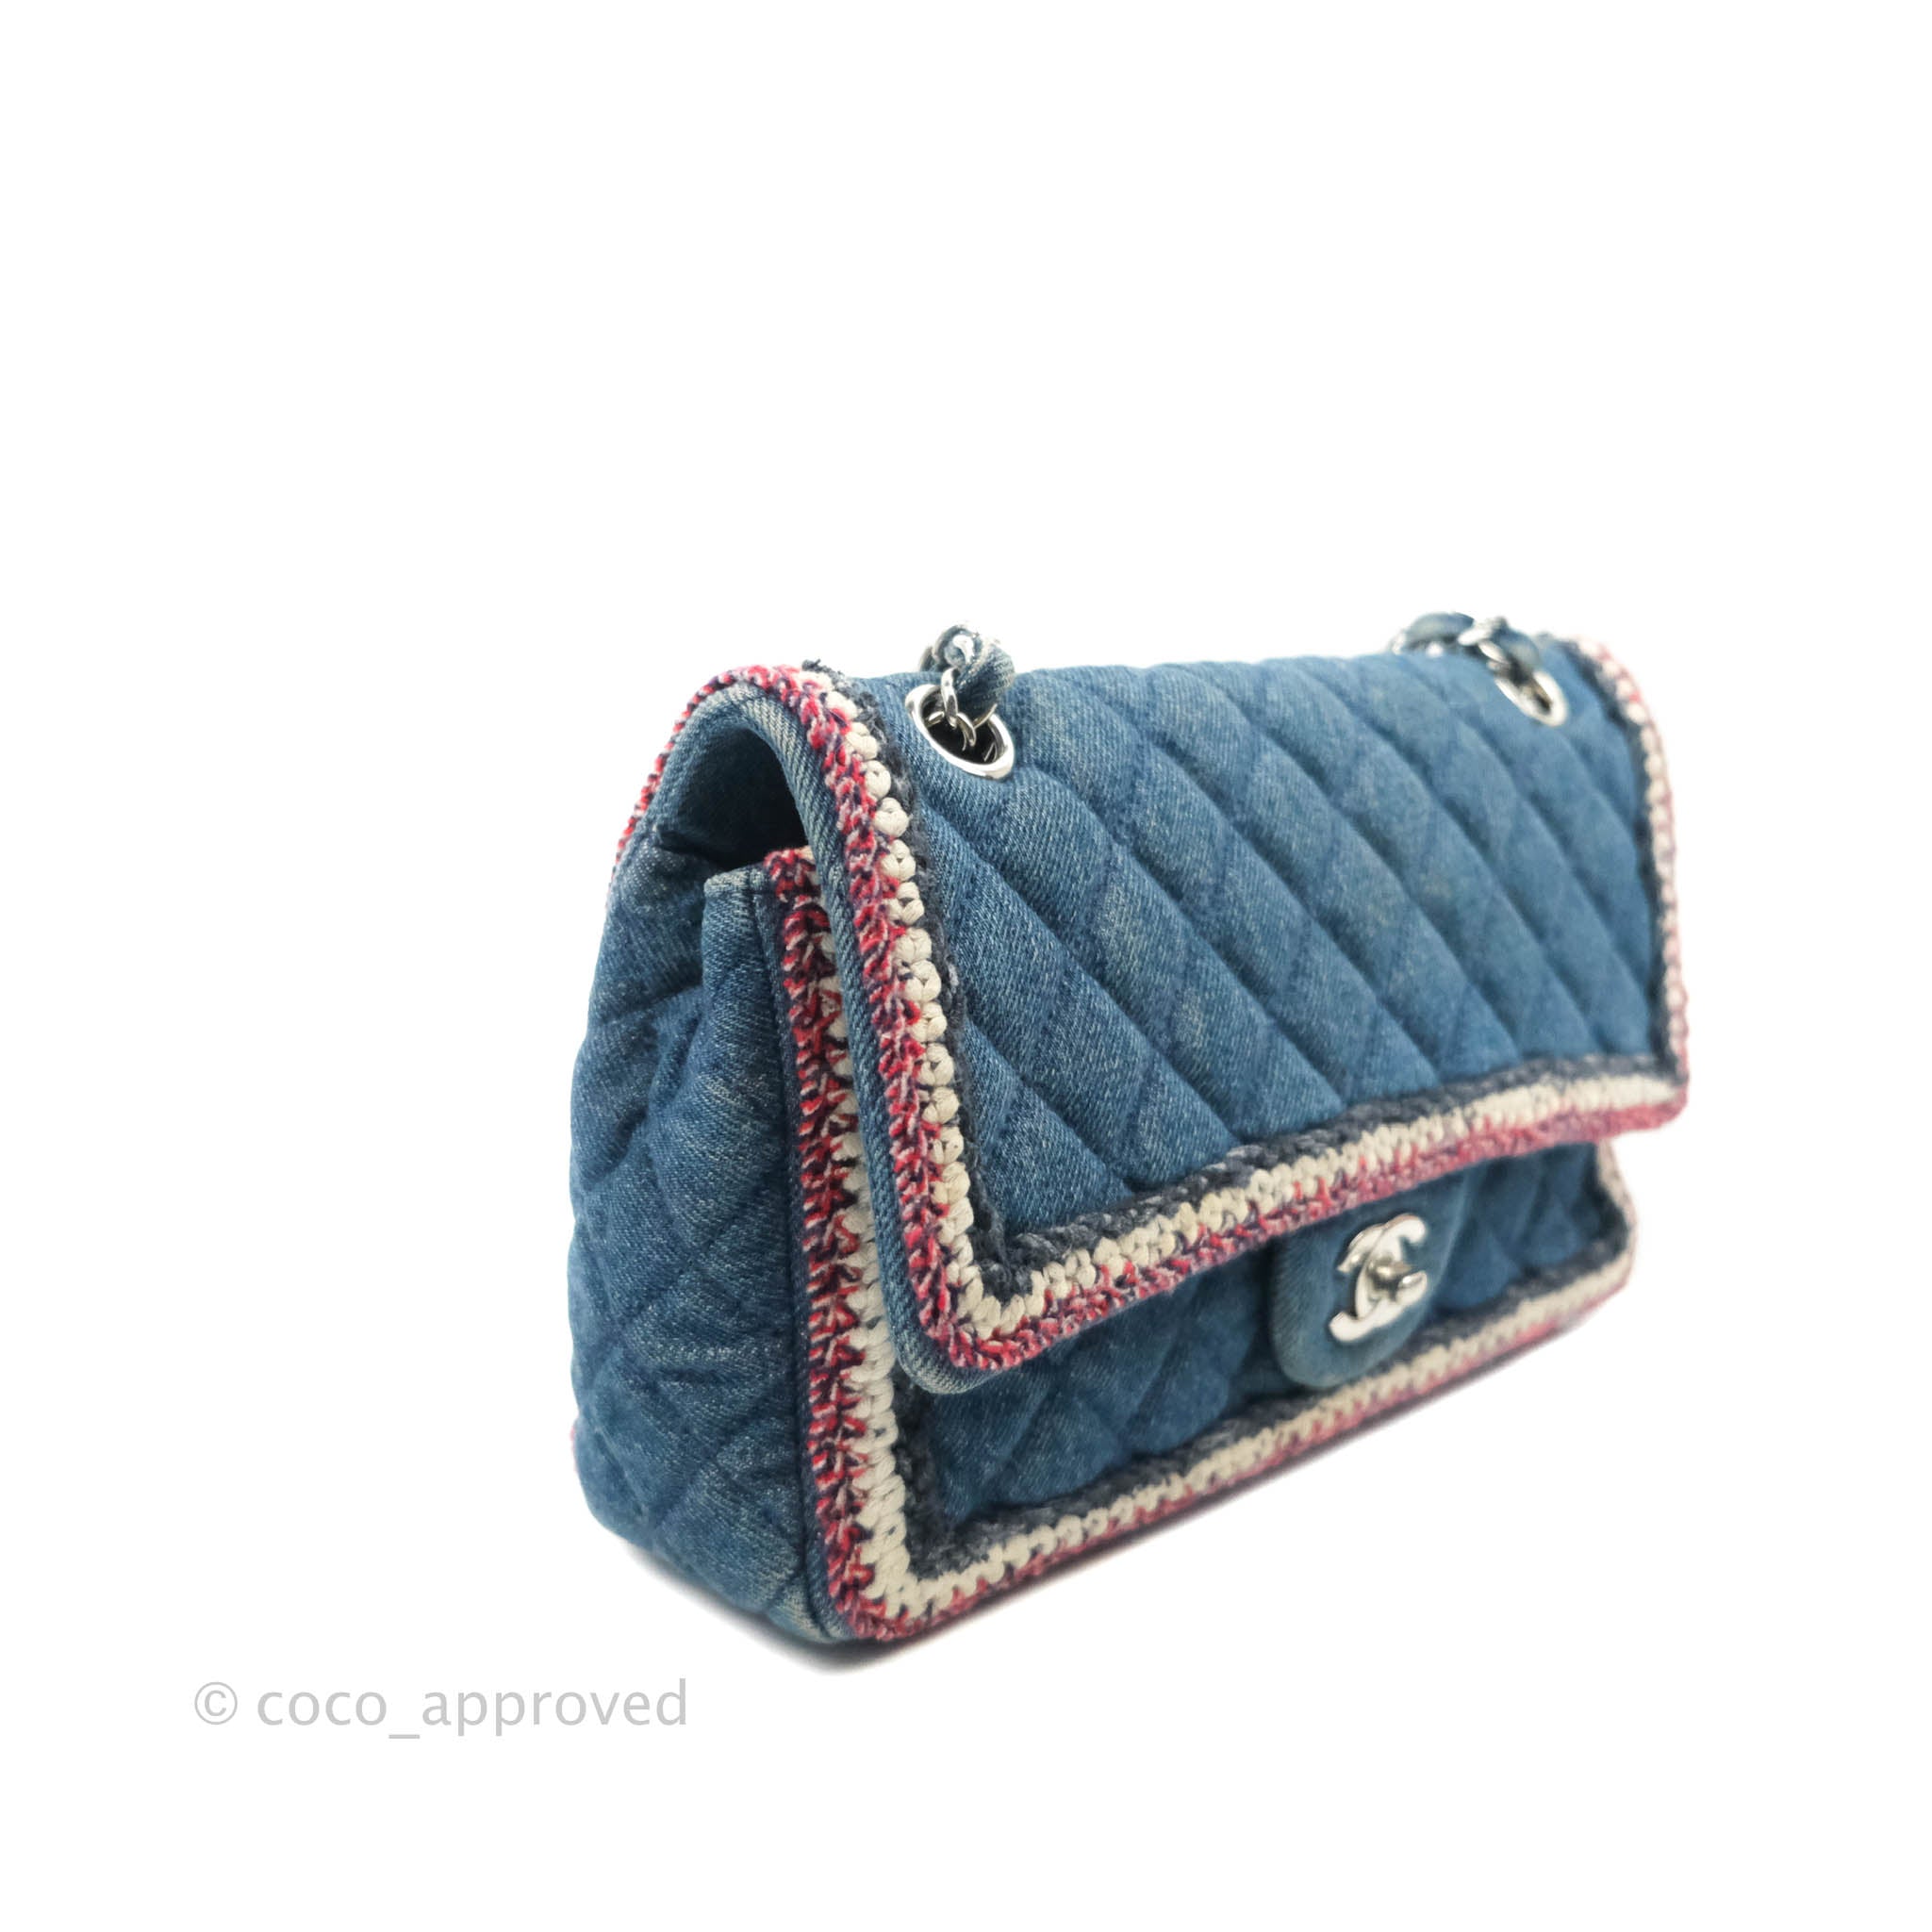 Chanel Denim Flap - 41 For Sale on 1stDibs  chanel denim flap bag, chanel  classic flap bag denim, denim chanel classic flap